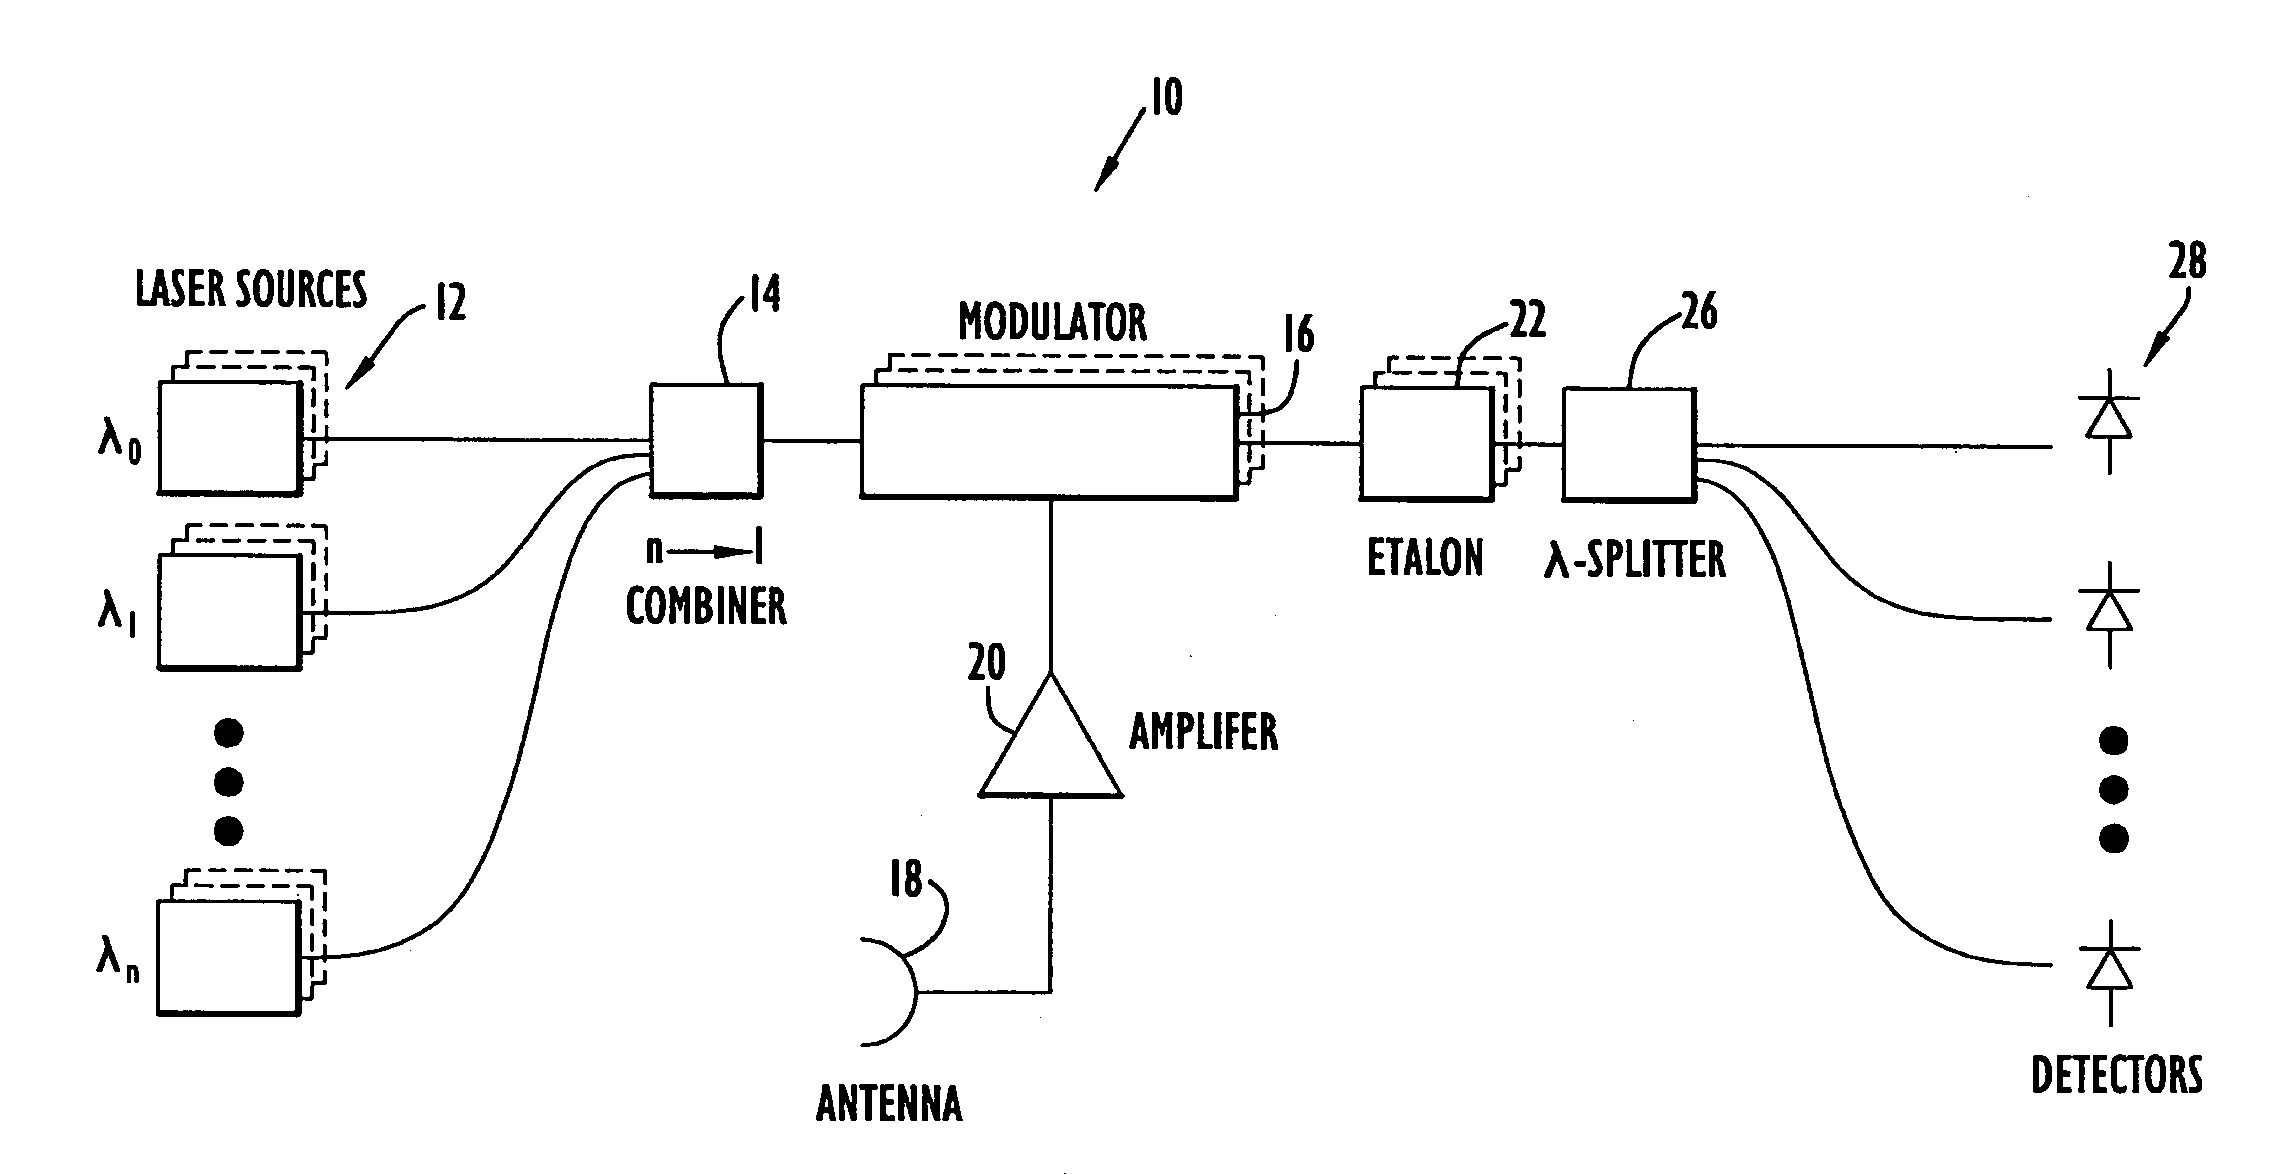 Photonic channelized RF receiver employing dense wavelength division multiplexing